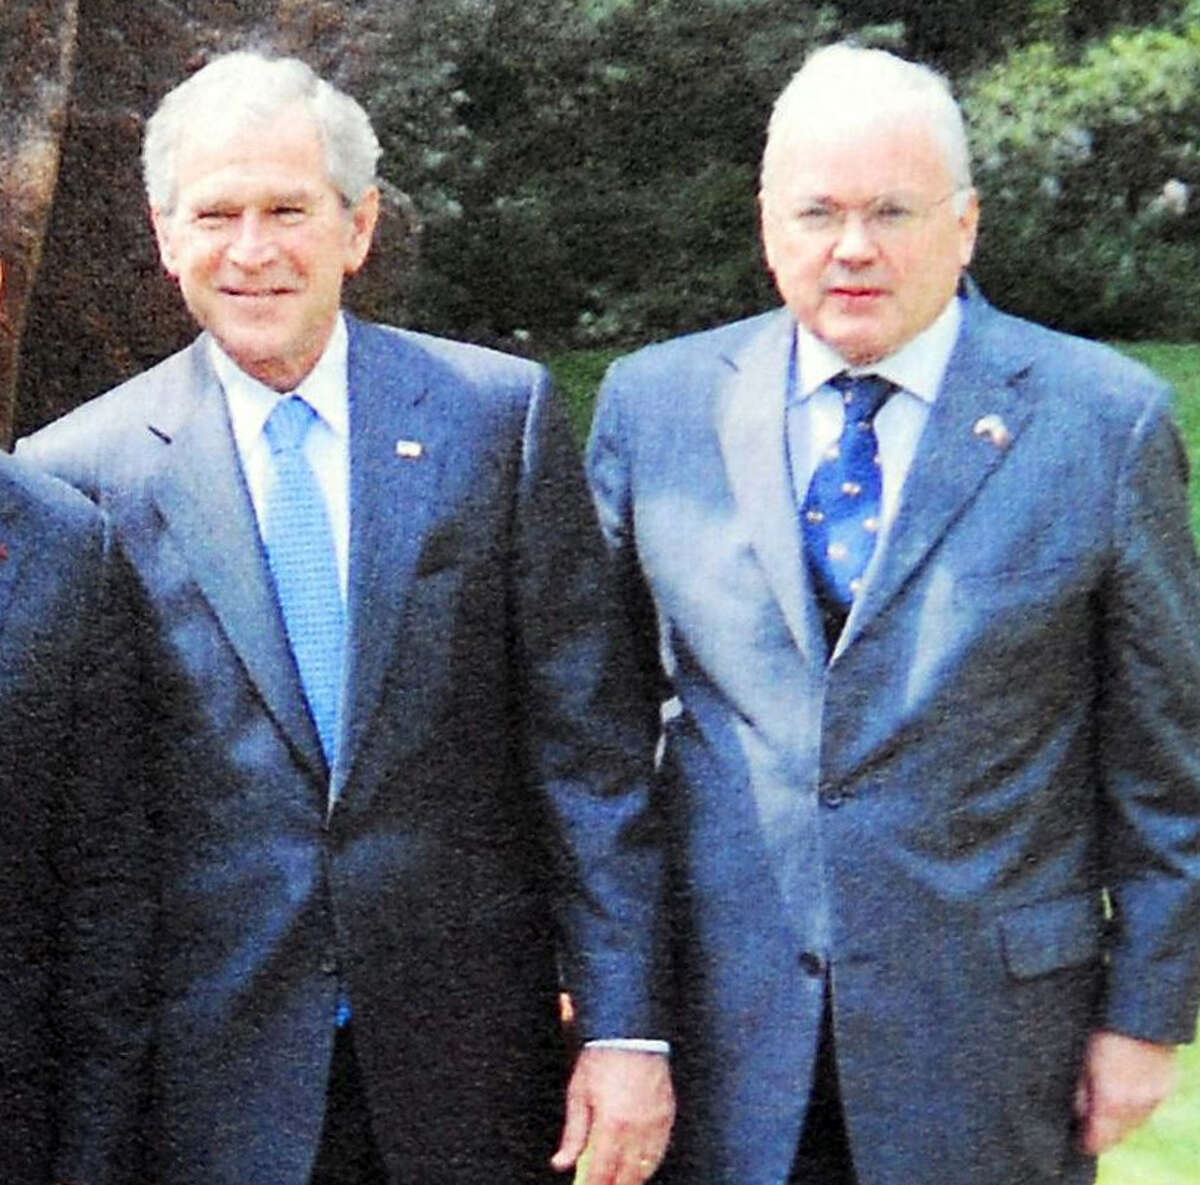 U.S. President George W. Bush, center and then U.S. Ambassador to France, Craig Stapleton in 2009. Stapleton formerly co-owned the Texas Rangers baseball team with George W. Bush but July 2009, he became a co-owner of the St. Louis Cardinals. The World Series, featuring the St. Louis Cardinals versus the Texas Rangers starts Wednesday Oct. 19, 2011 in St. Louis.